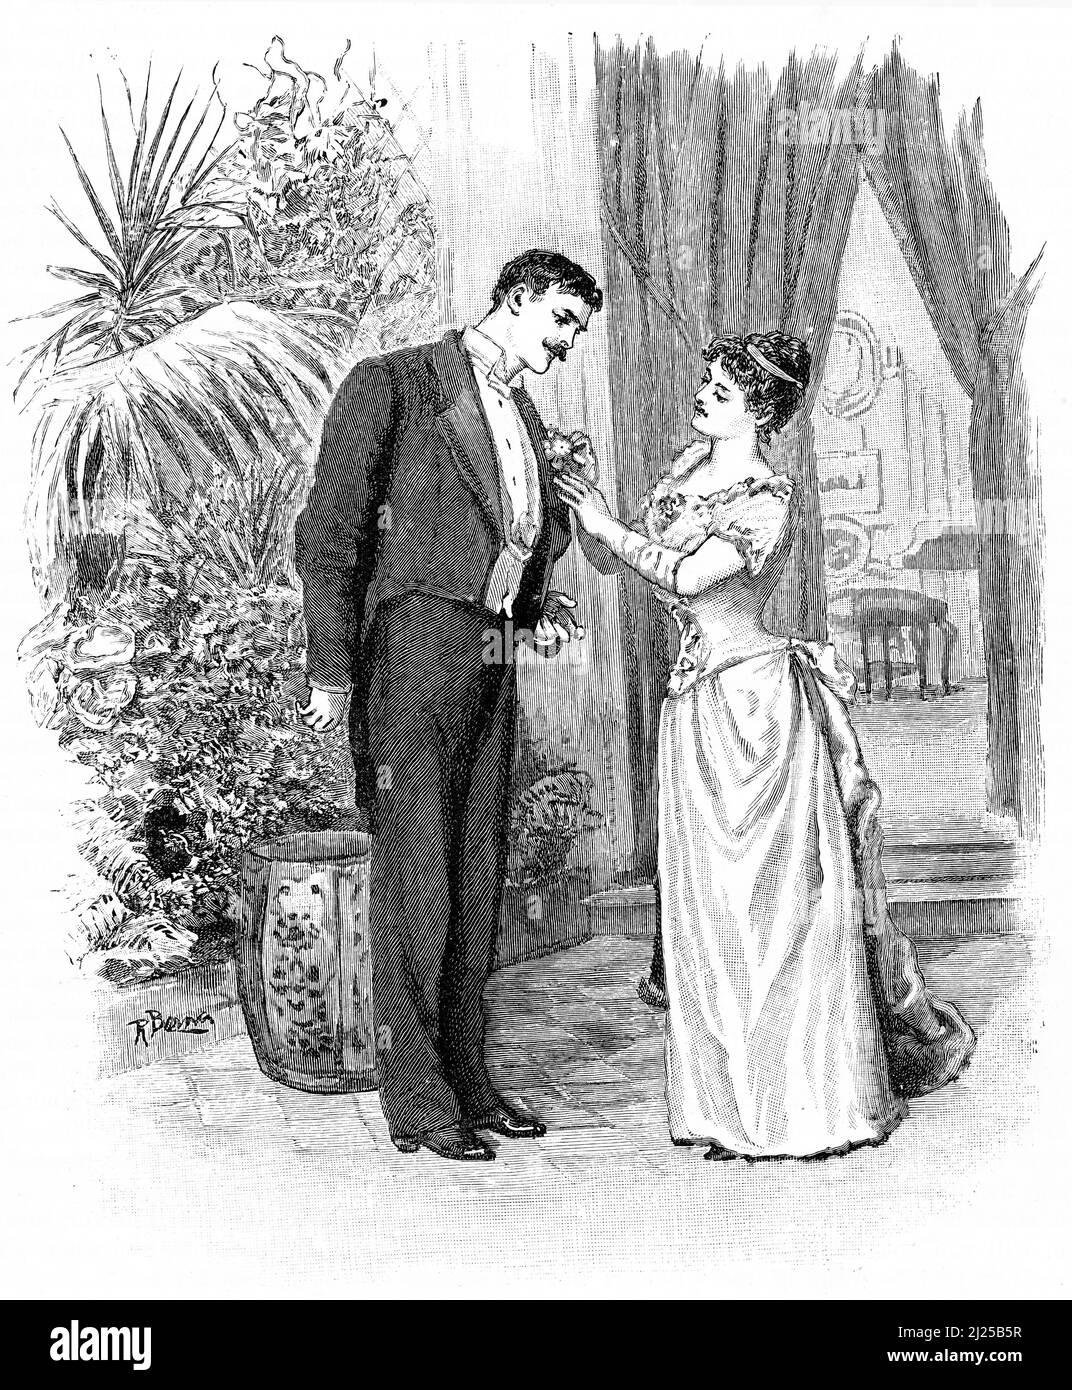 Engraving of a well-dressed woman adjusting the clothing of a man in Victorian-era England, circa 1890 Stock Photo